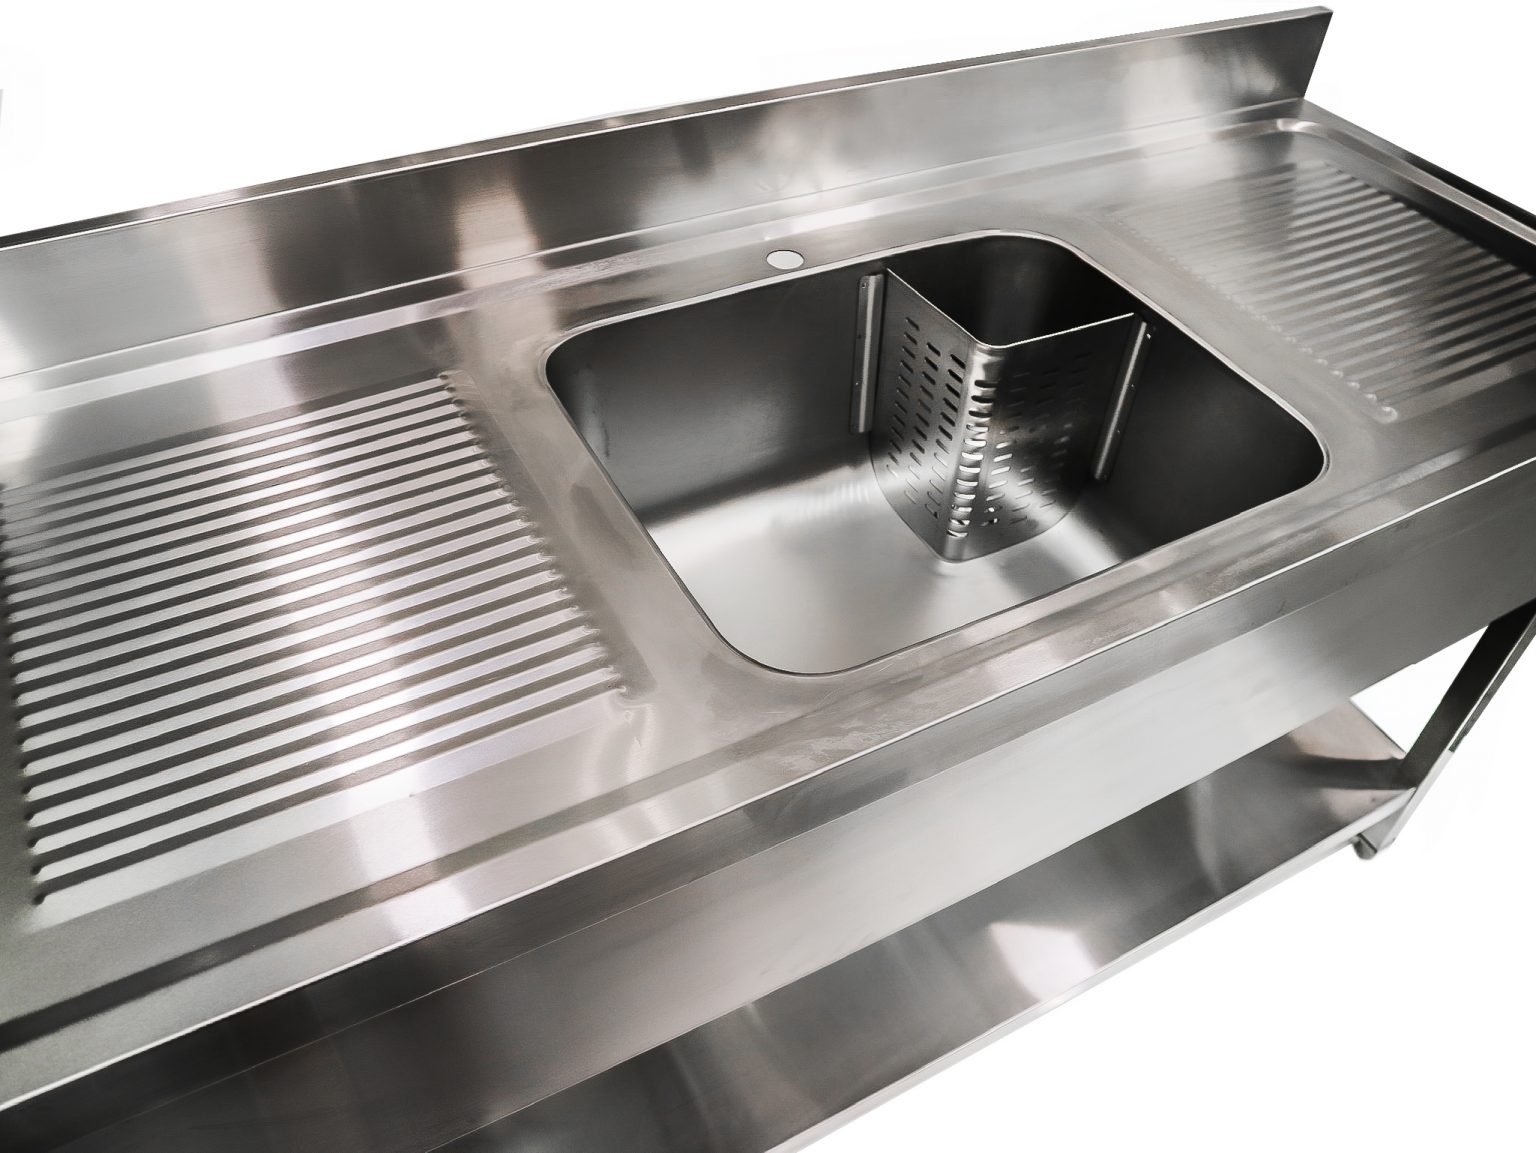 diagnostic kitchen sink drainer left or right